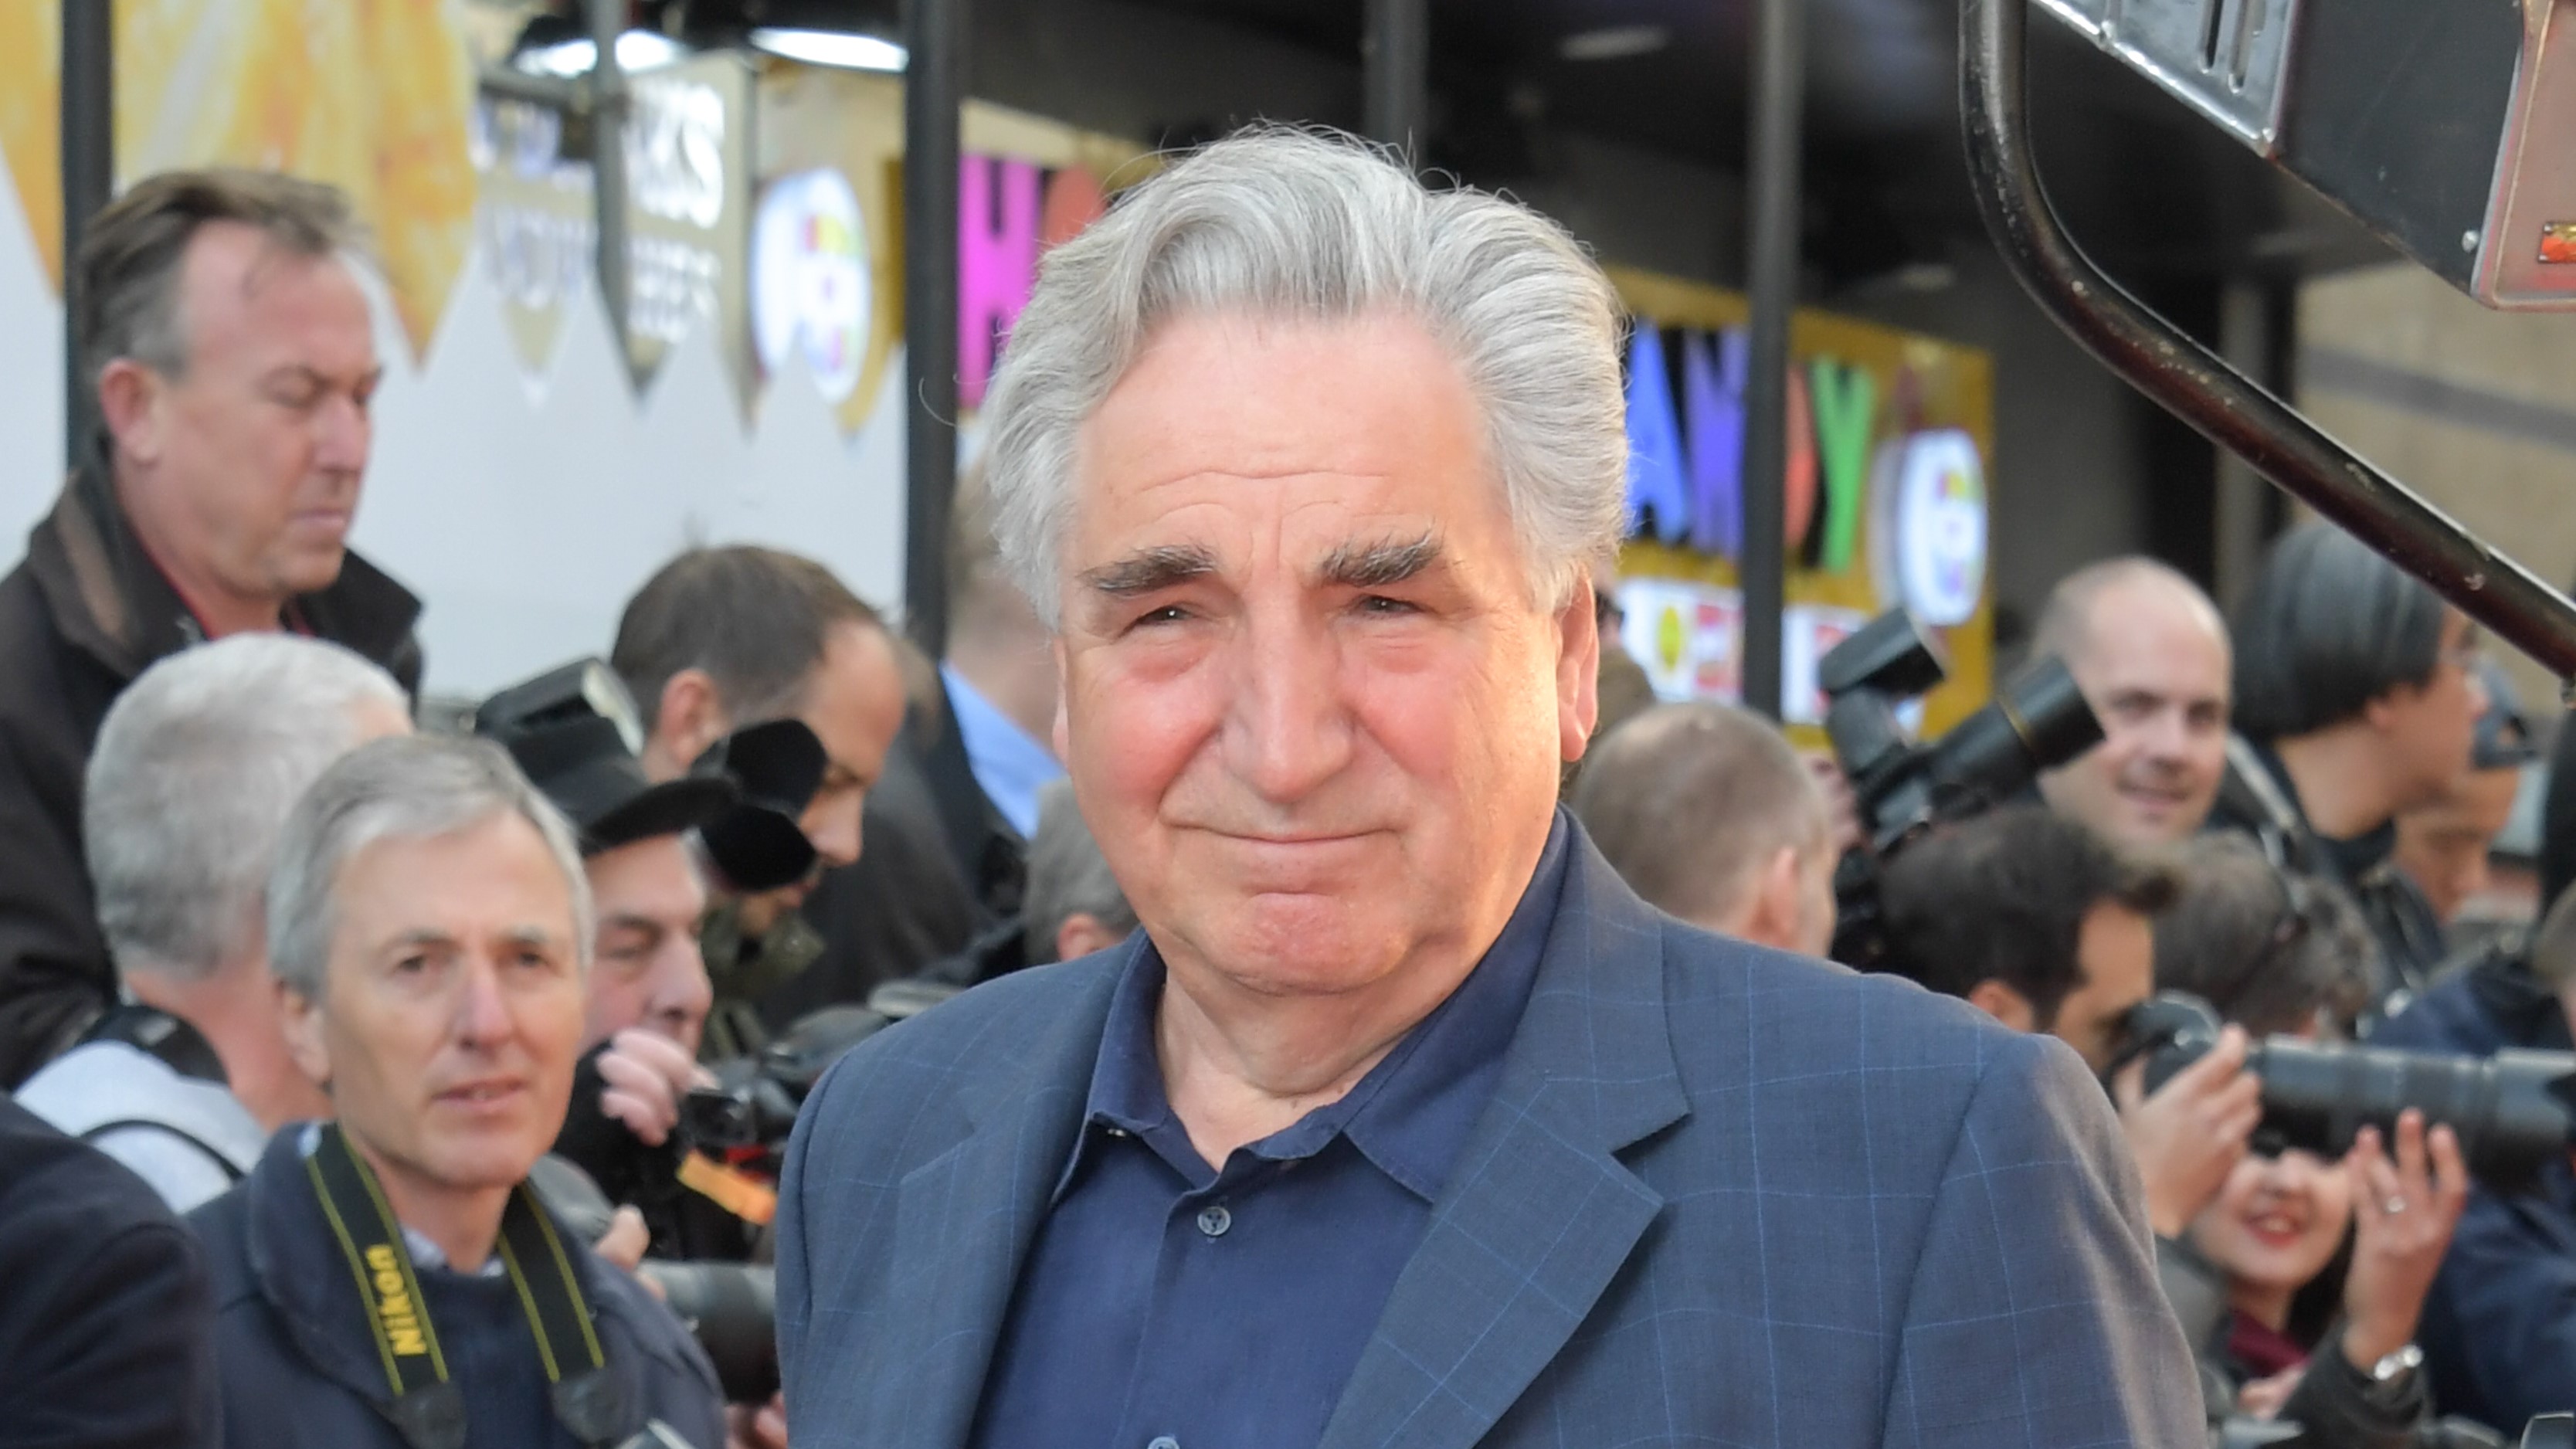 Jim Carter on the red carpet at the Downton Abbey: A New Era world premiere